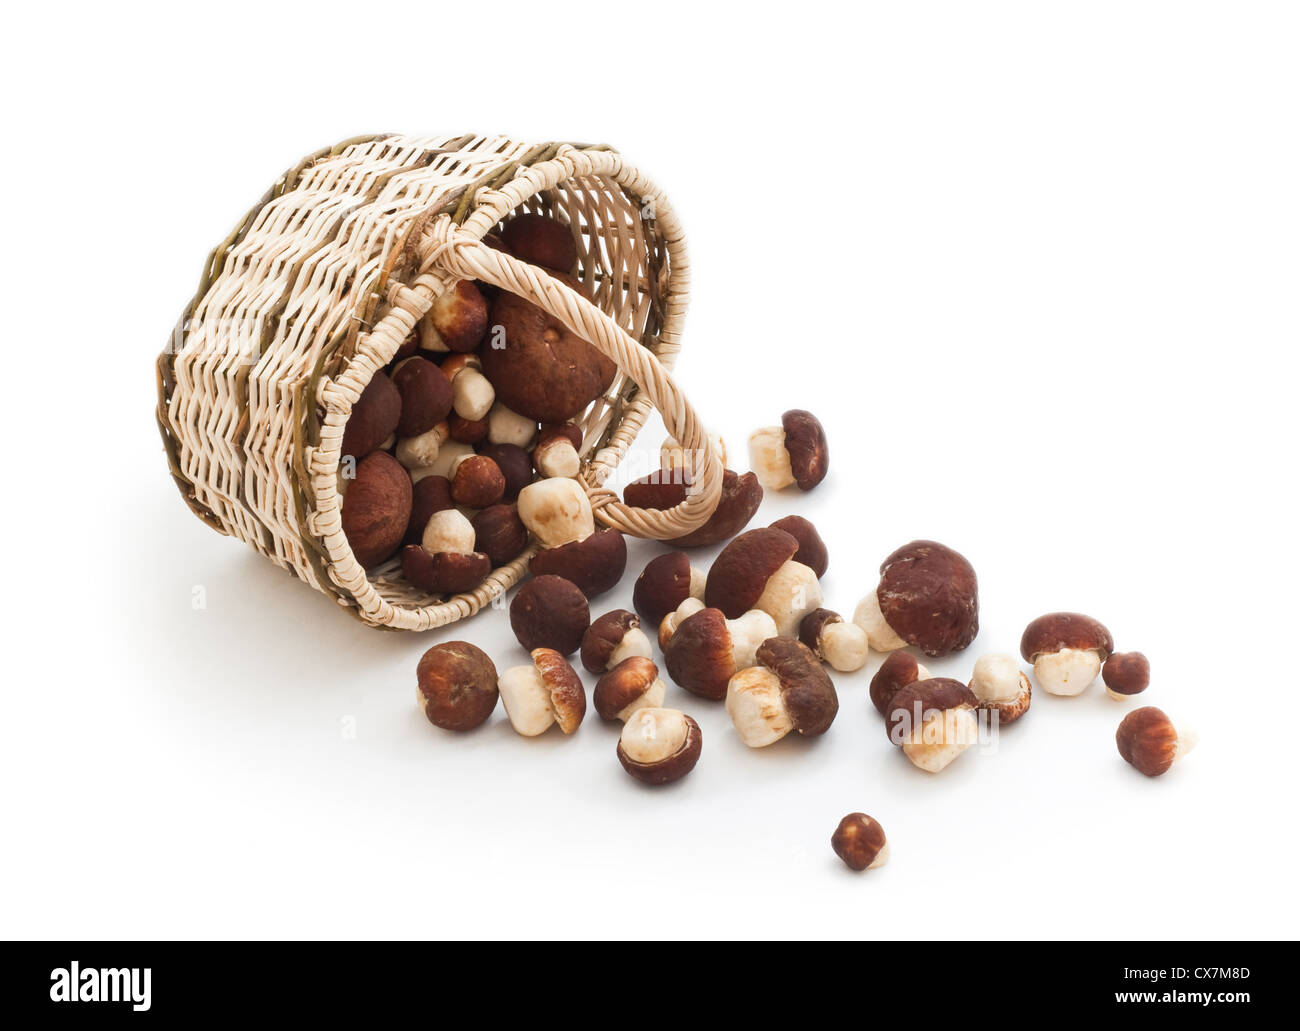 Basket full of cepe mushrooms and small pile Stock Photo